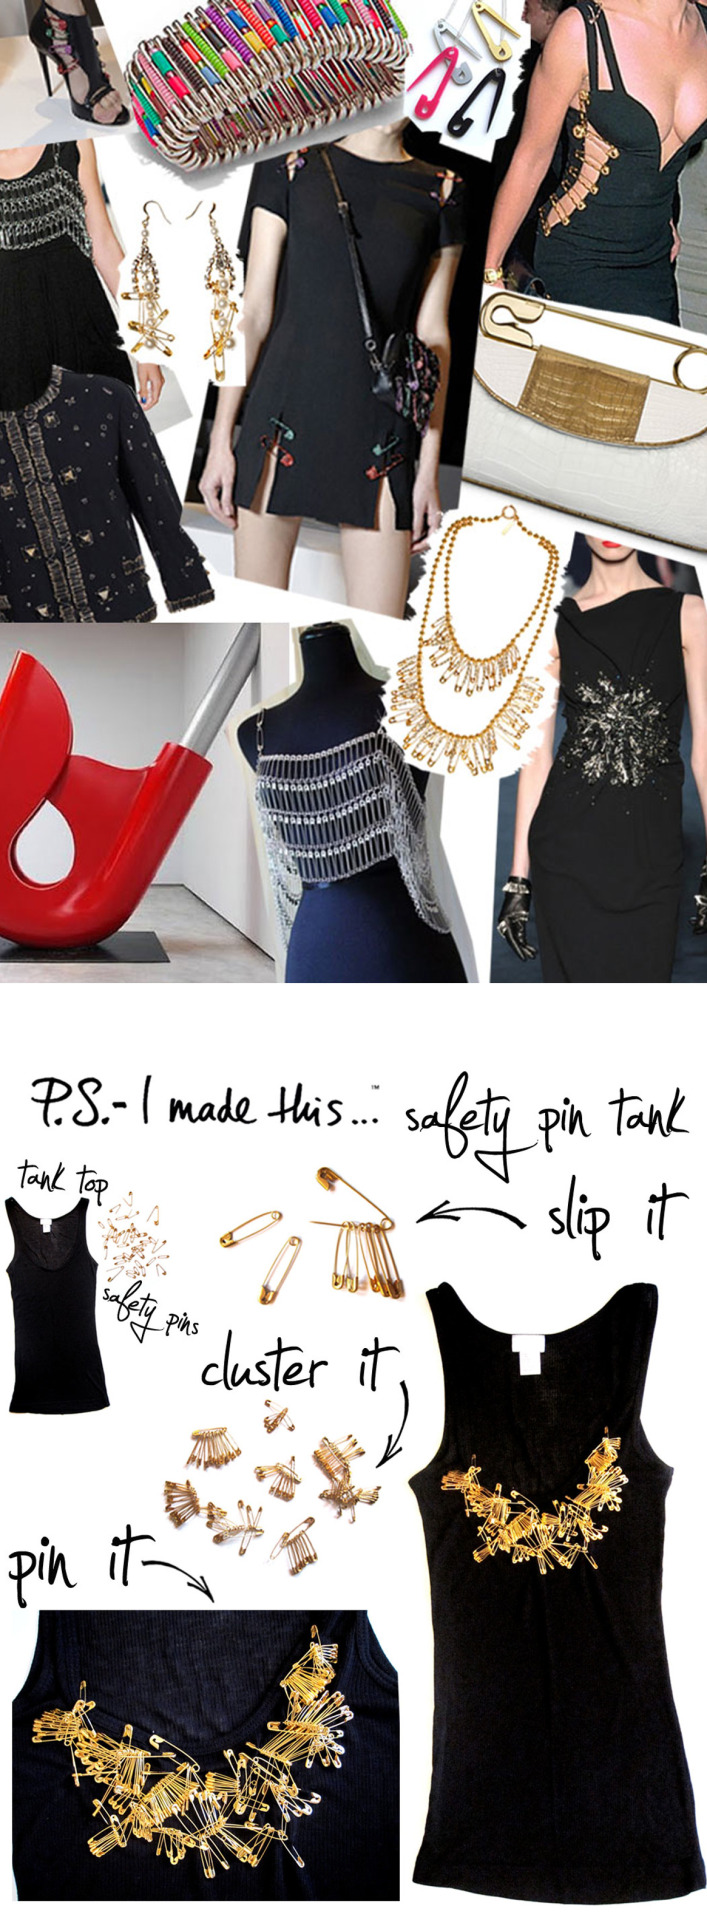 Pin on All Things Style